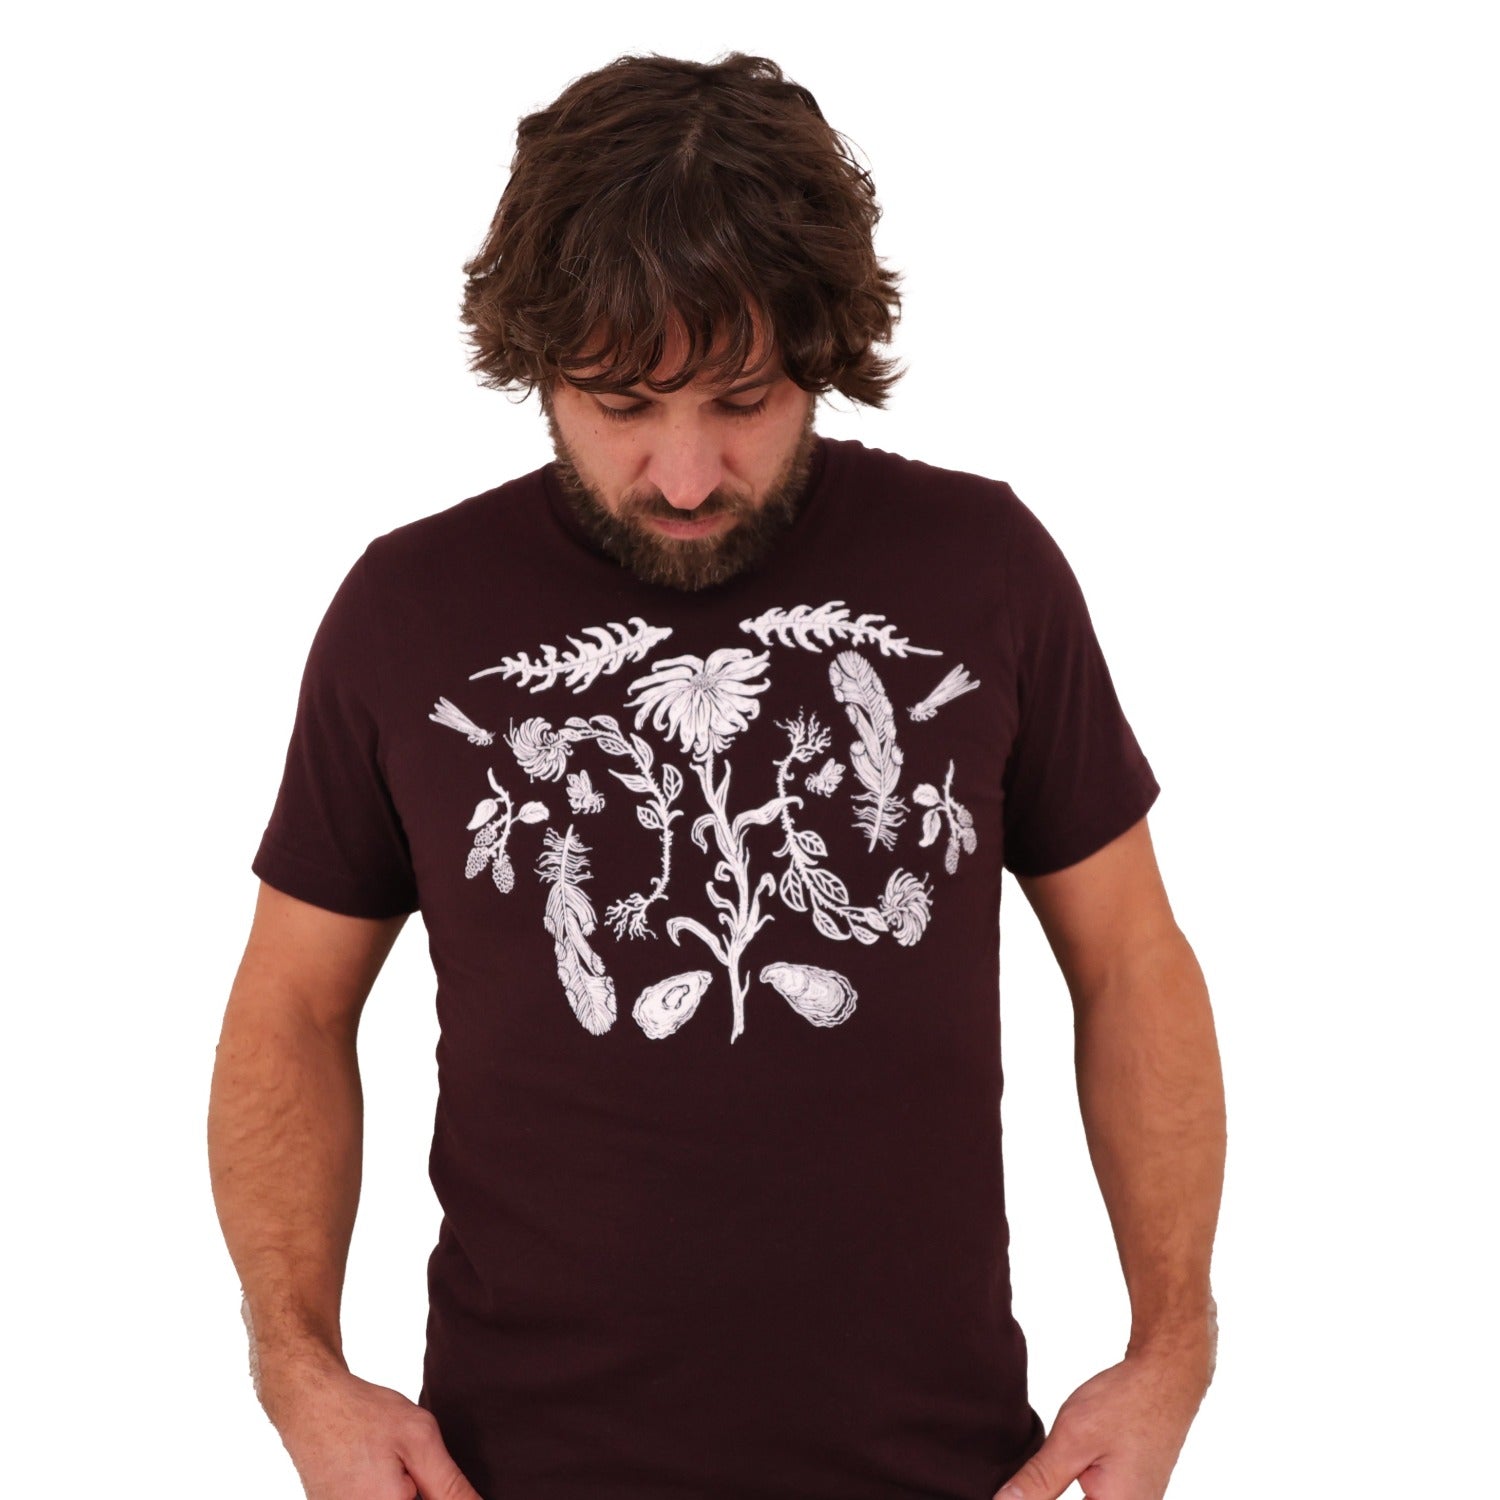 Man wearing a oxblood colored t-shirt with white ink of flowers, ferns, feathers, shells, etc